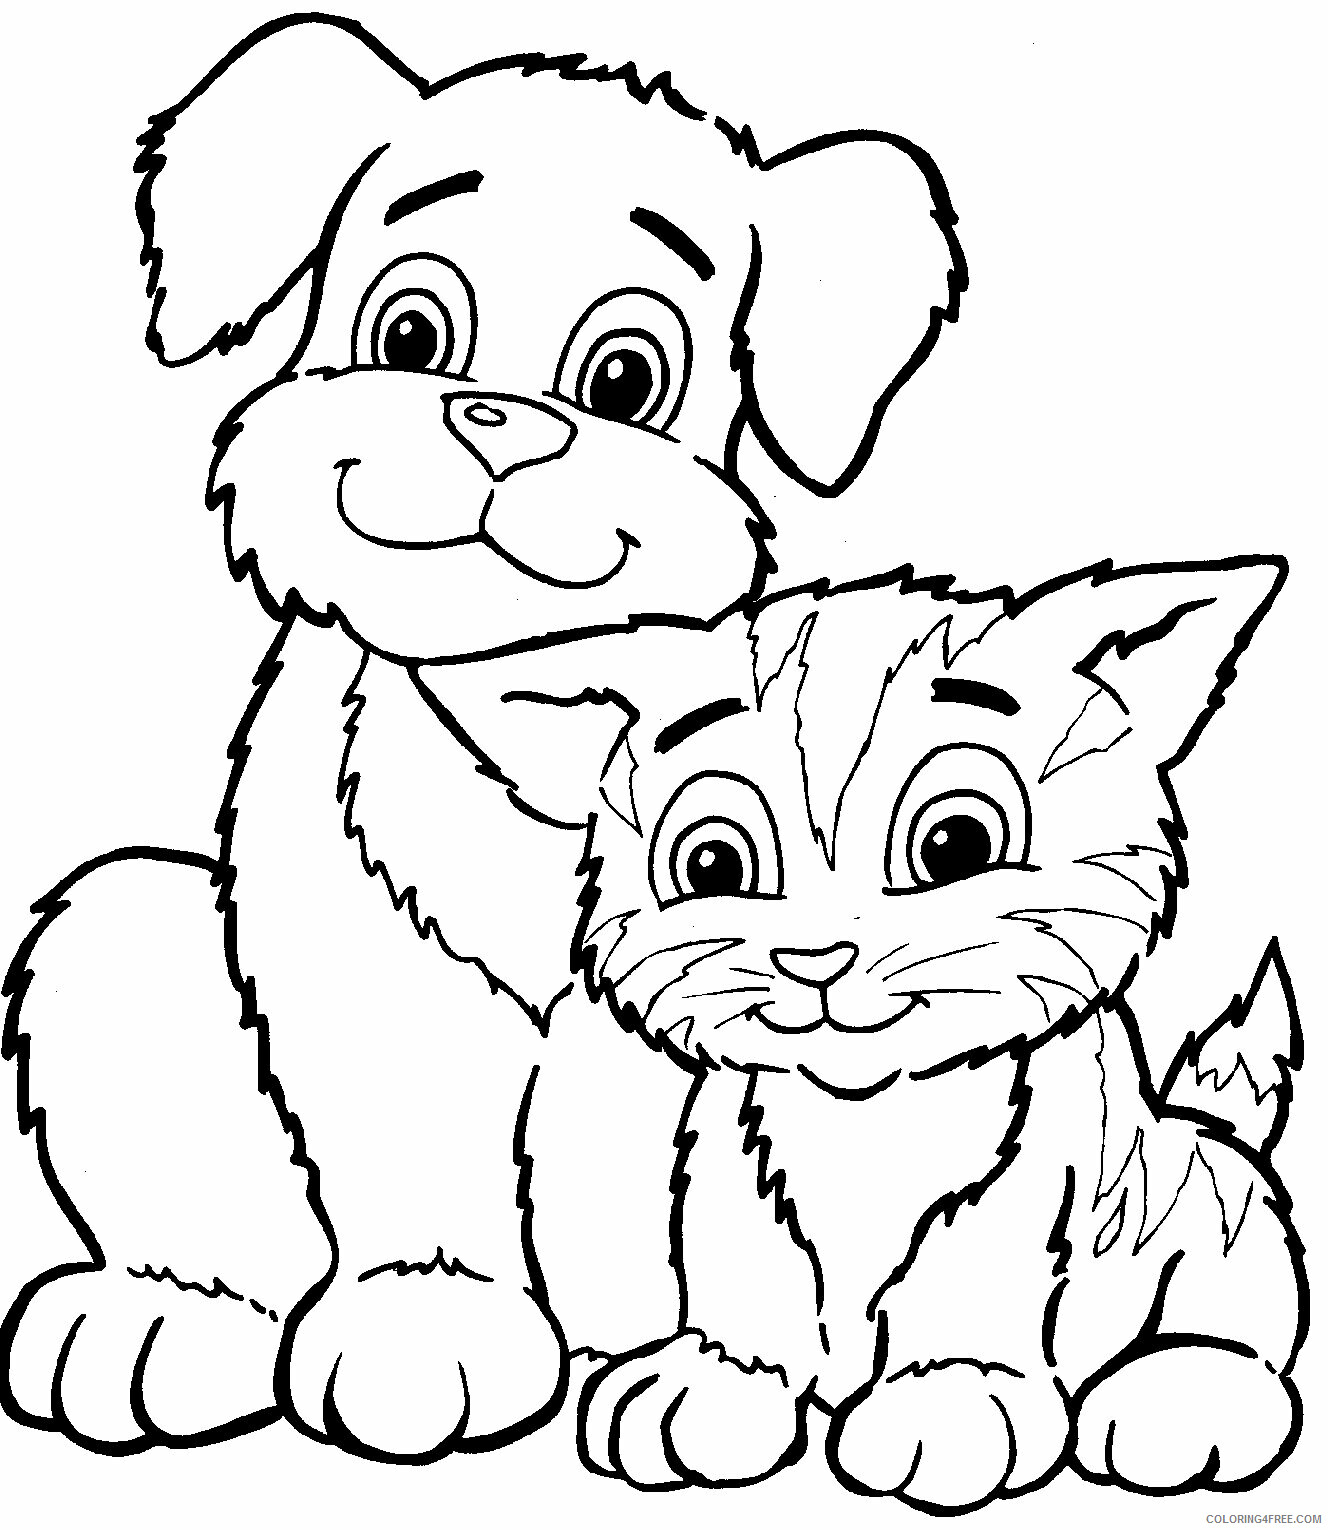 Cat Coloring Pages Animal Printable Sheets Cat and Dog 2021 0796 Coloring4free